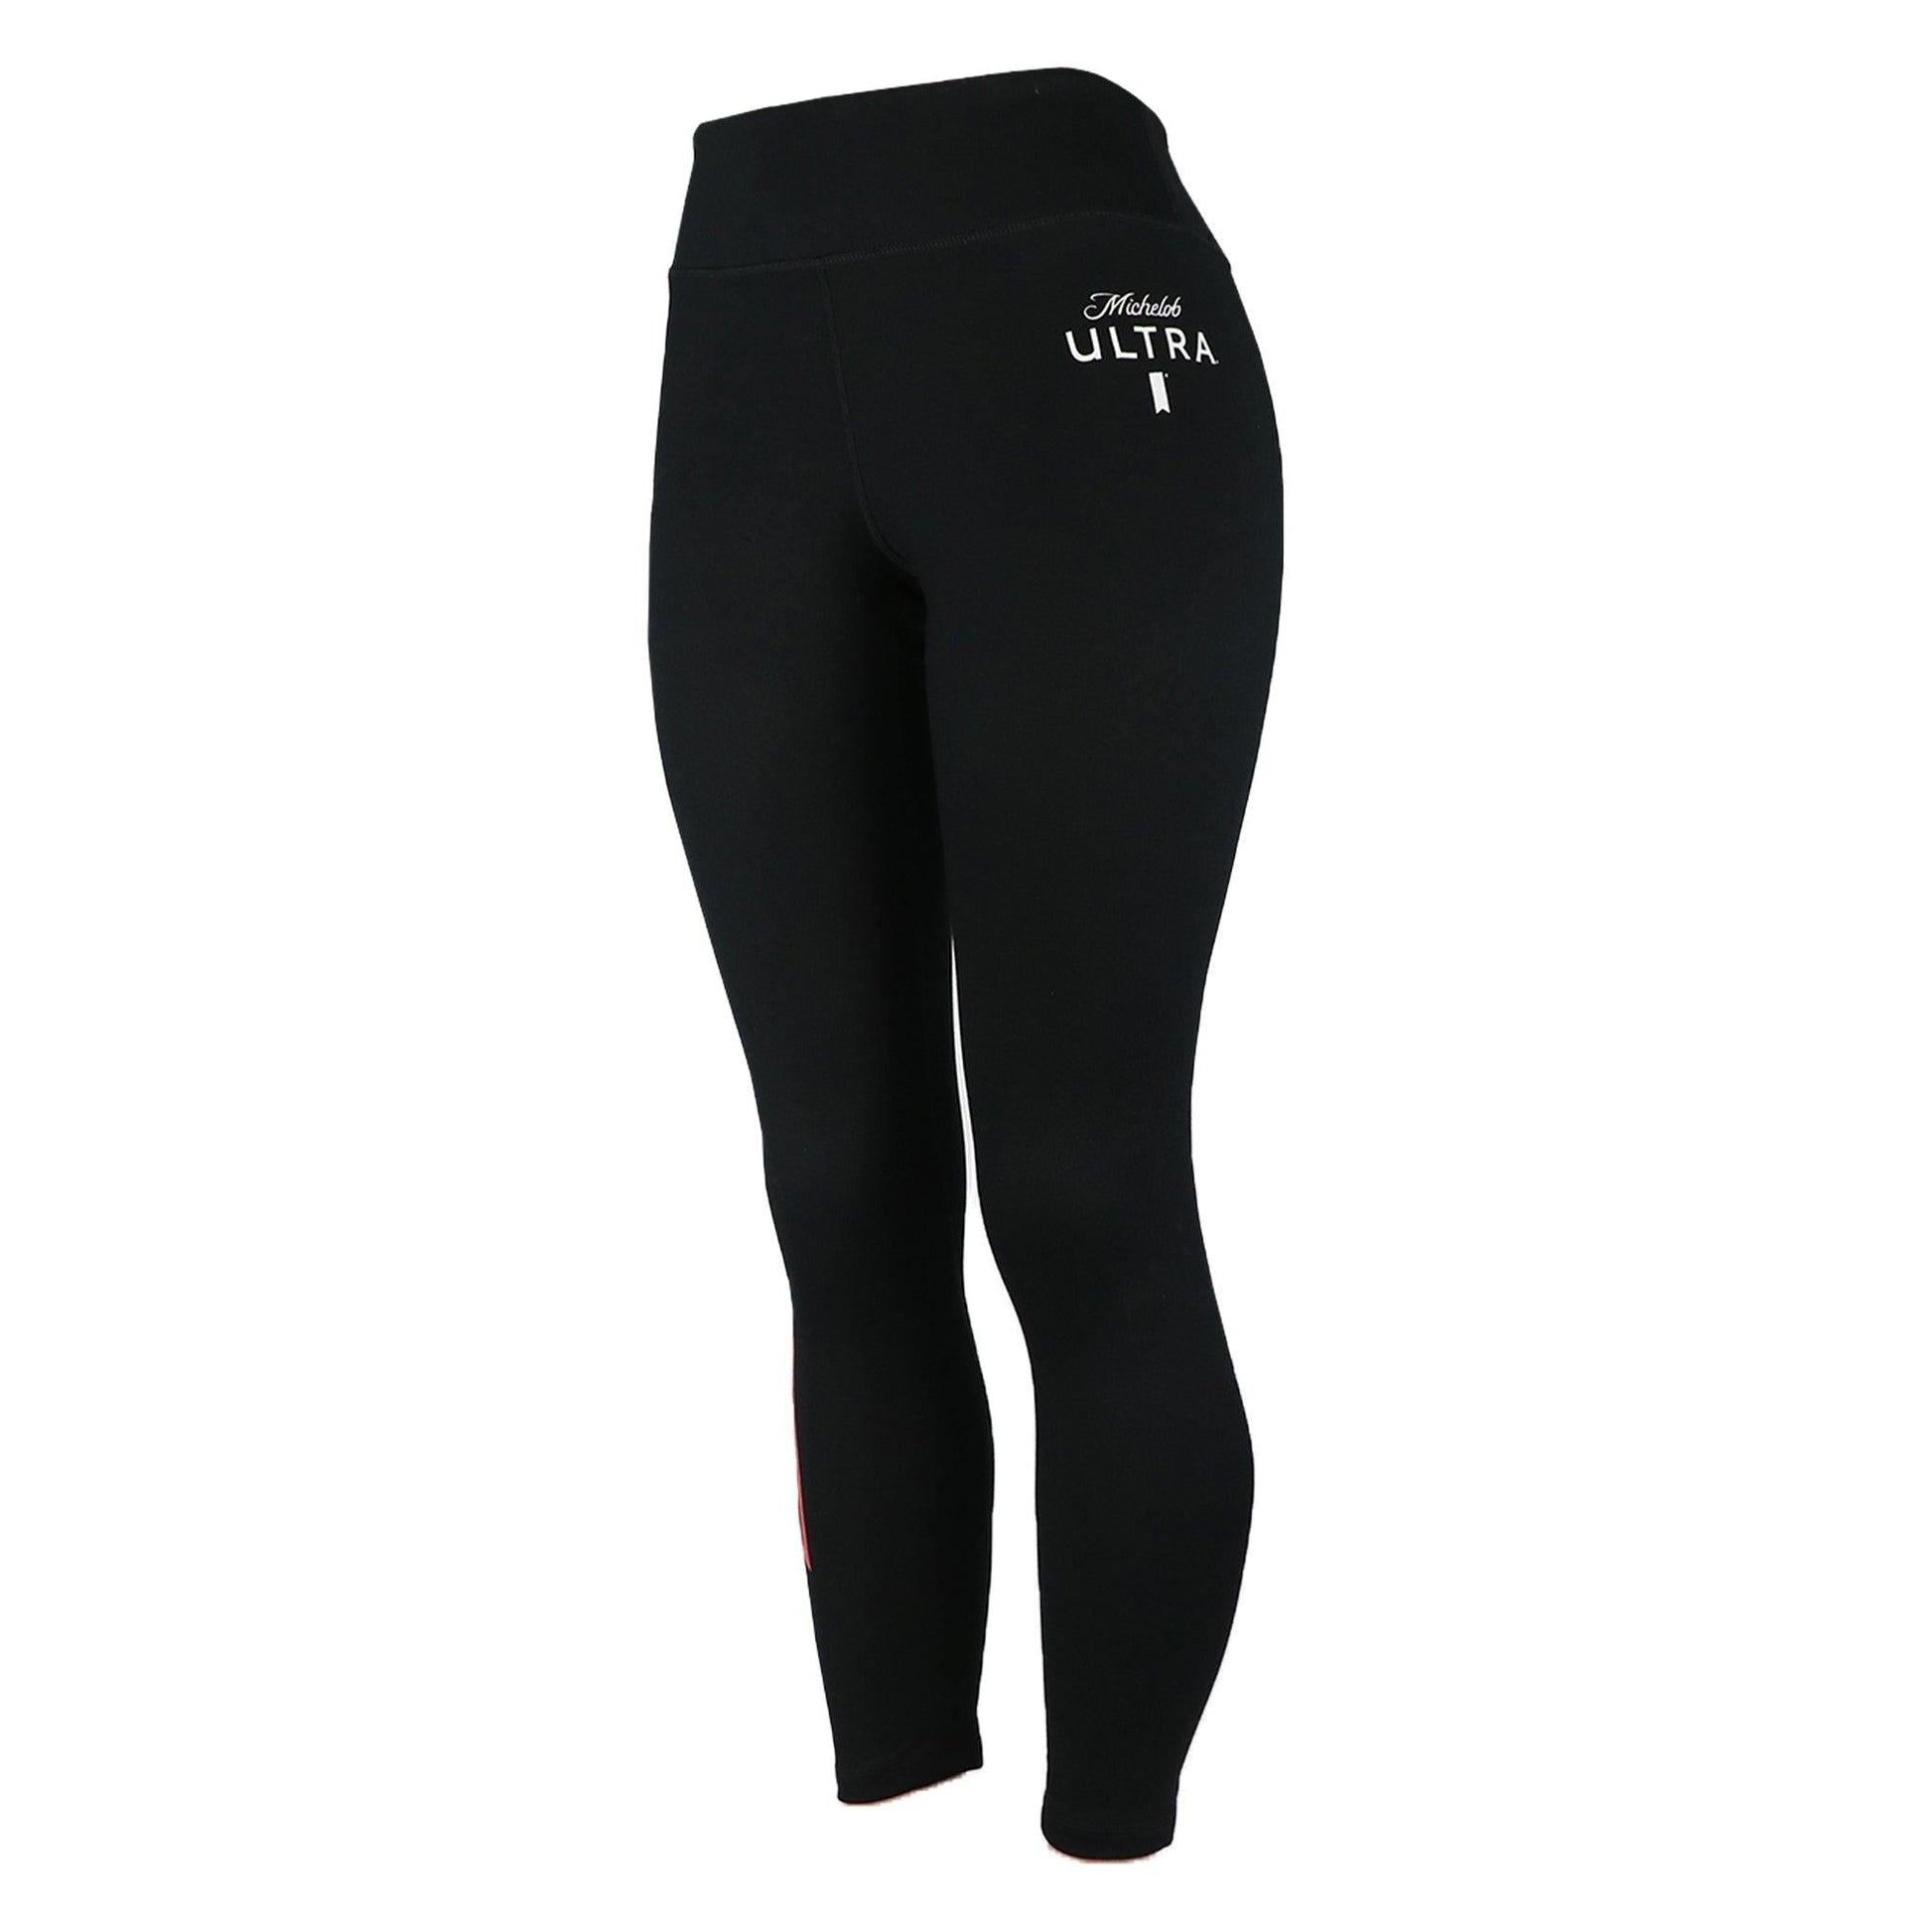 black michelob ultra womens yoga pants with red ribbon on right side of leg and michelob ultra logo on left upper thigh